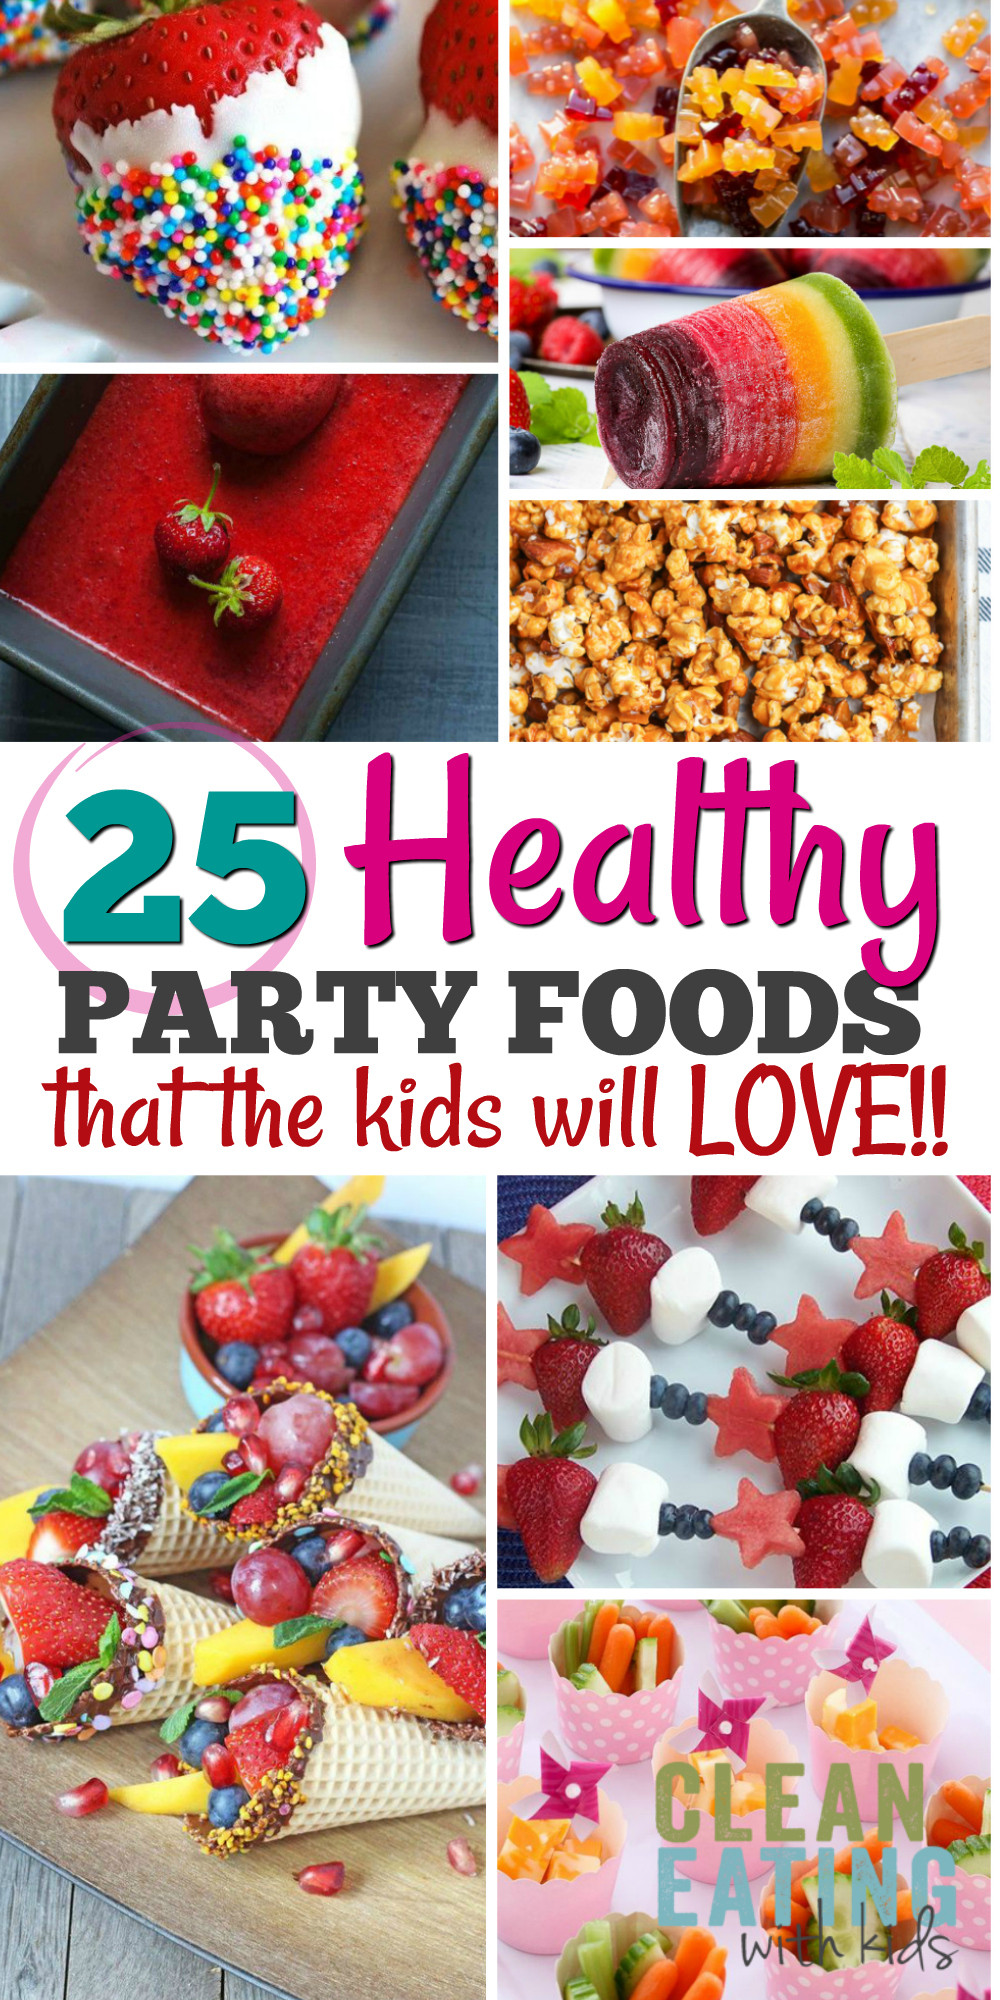 Best ideas about Birthday Party Food Ideas
. Save or Pin 25 Healthy Birthday Party Food Ideas Clean Eating with kids Now.